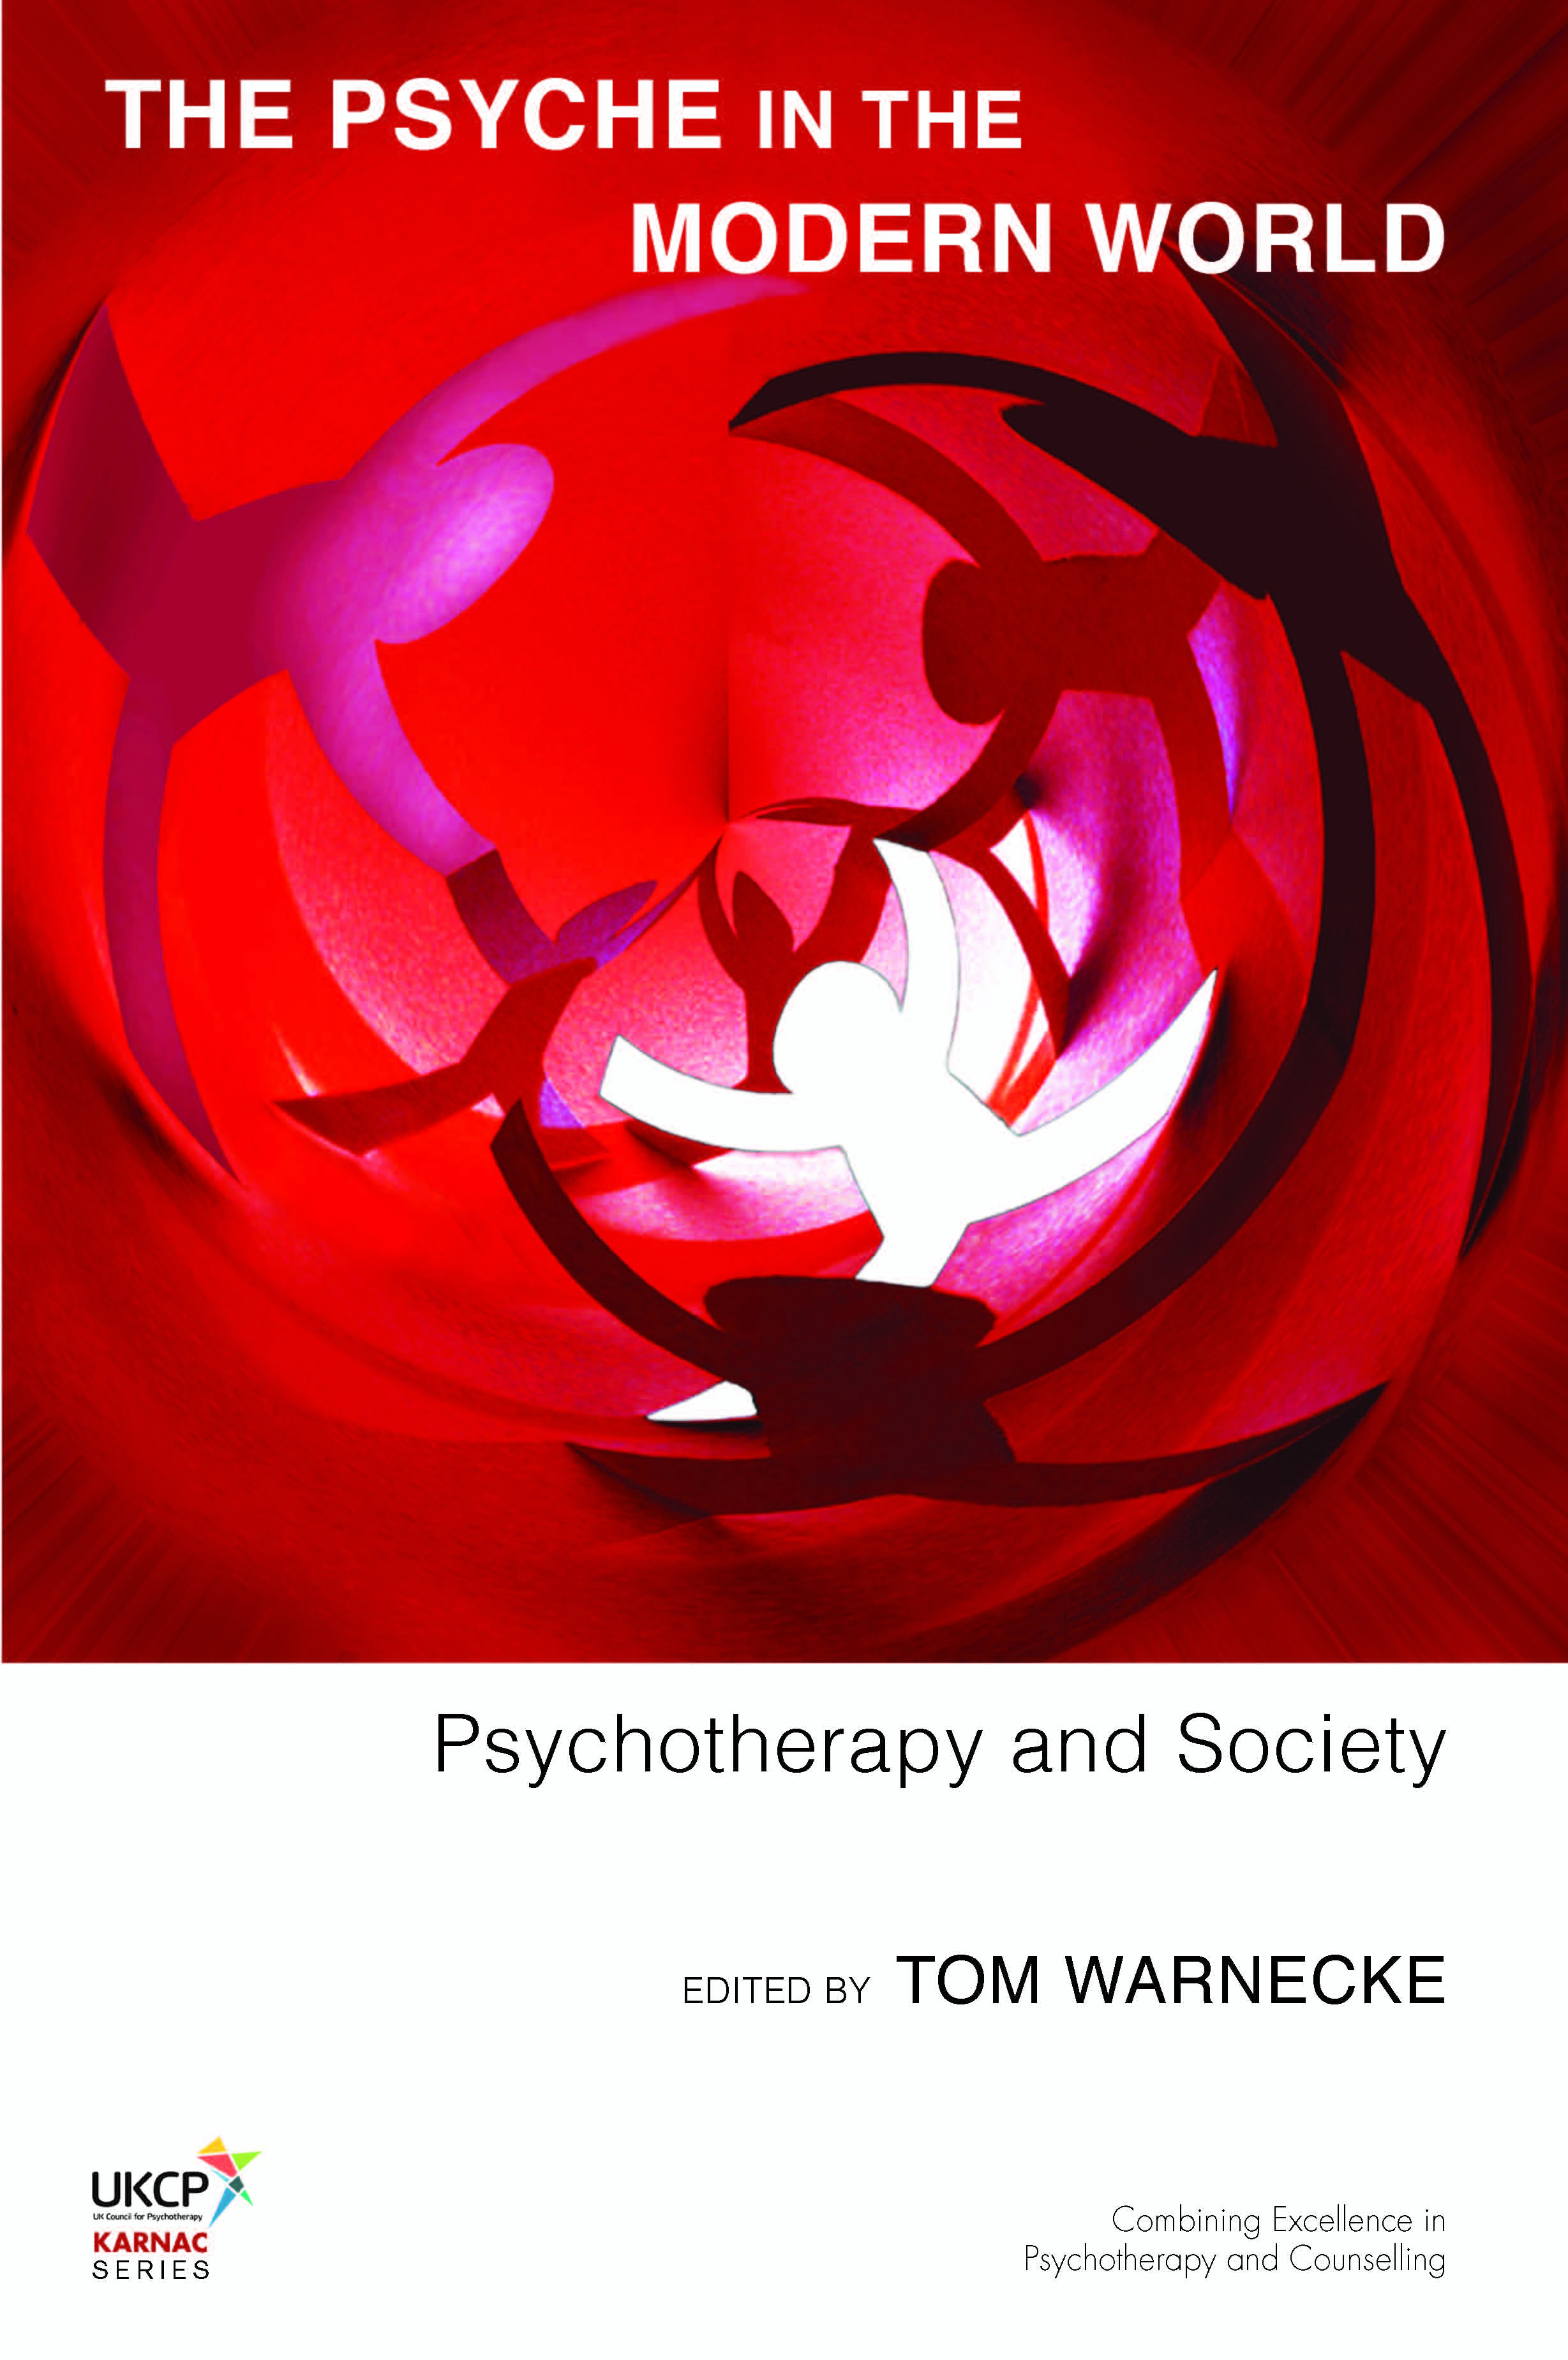 The Psyche in the Modern World: Psychotherapy and Society